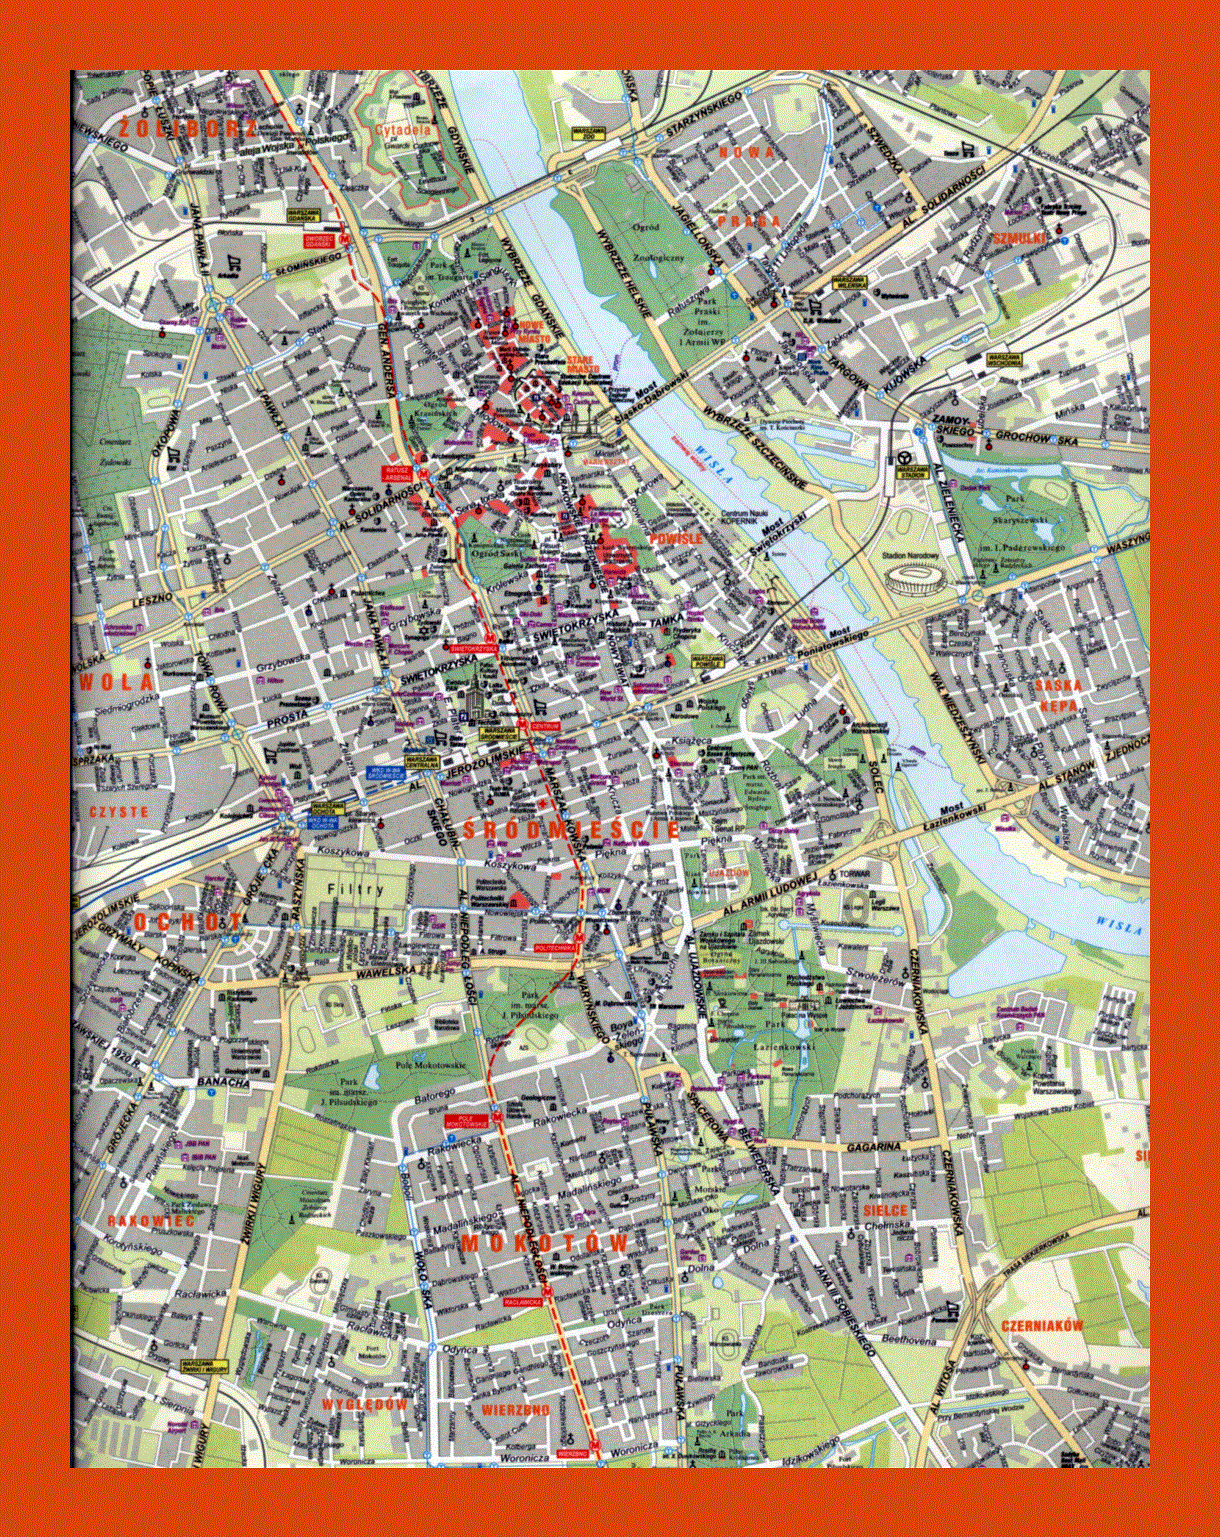 Road and tourist map of Warsaw city center